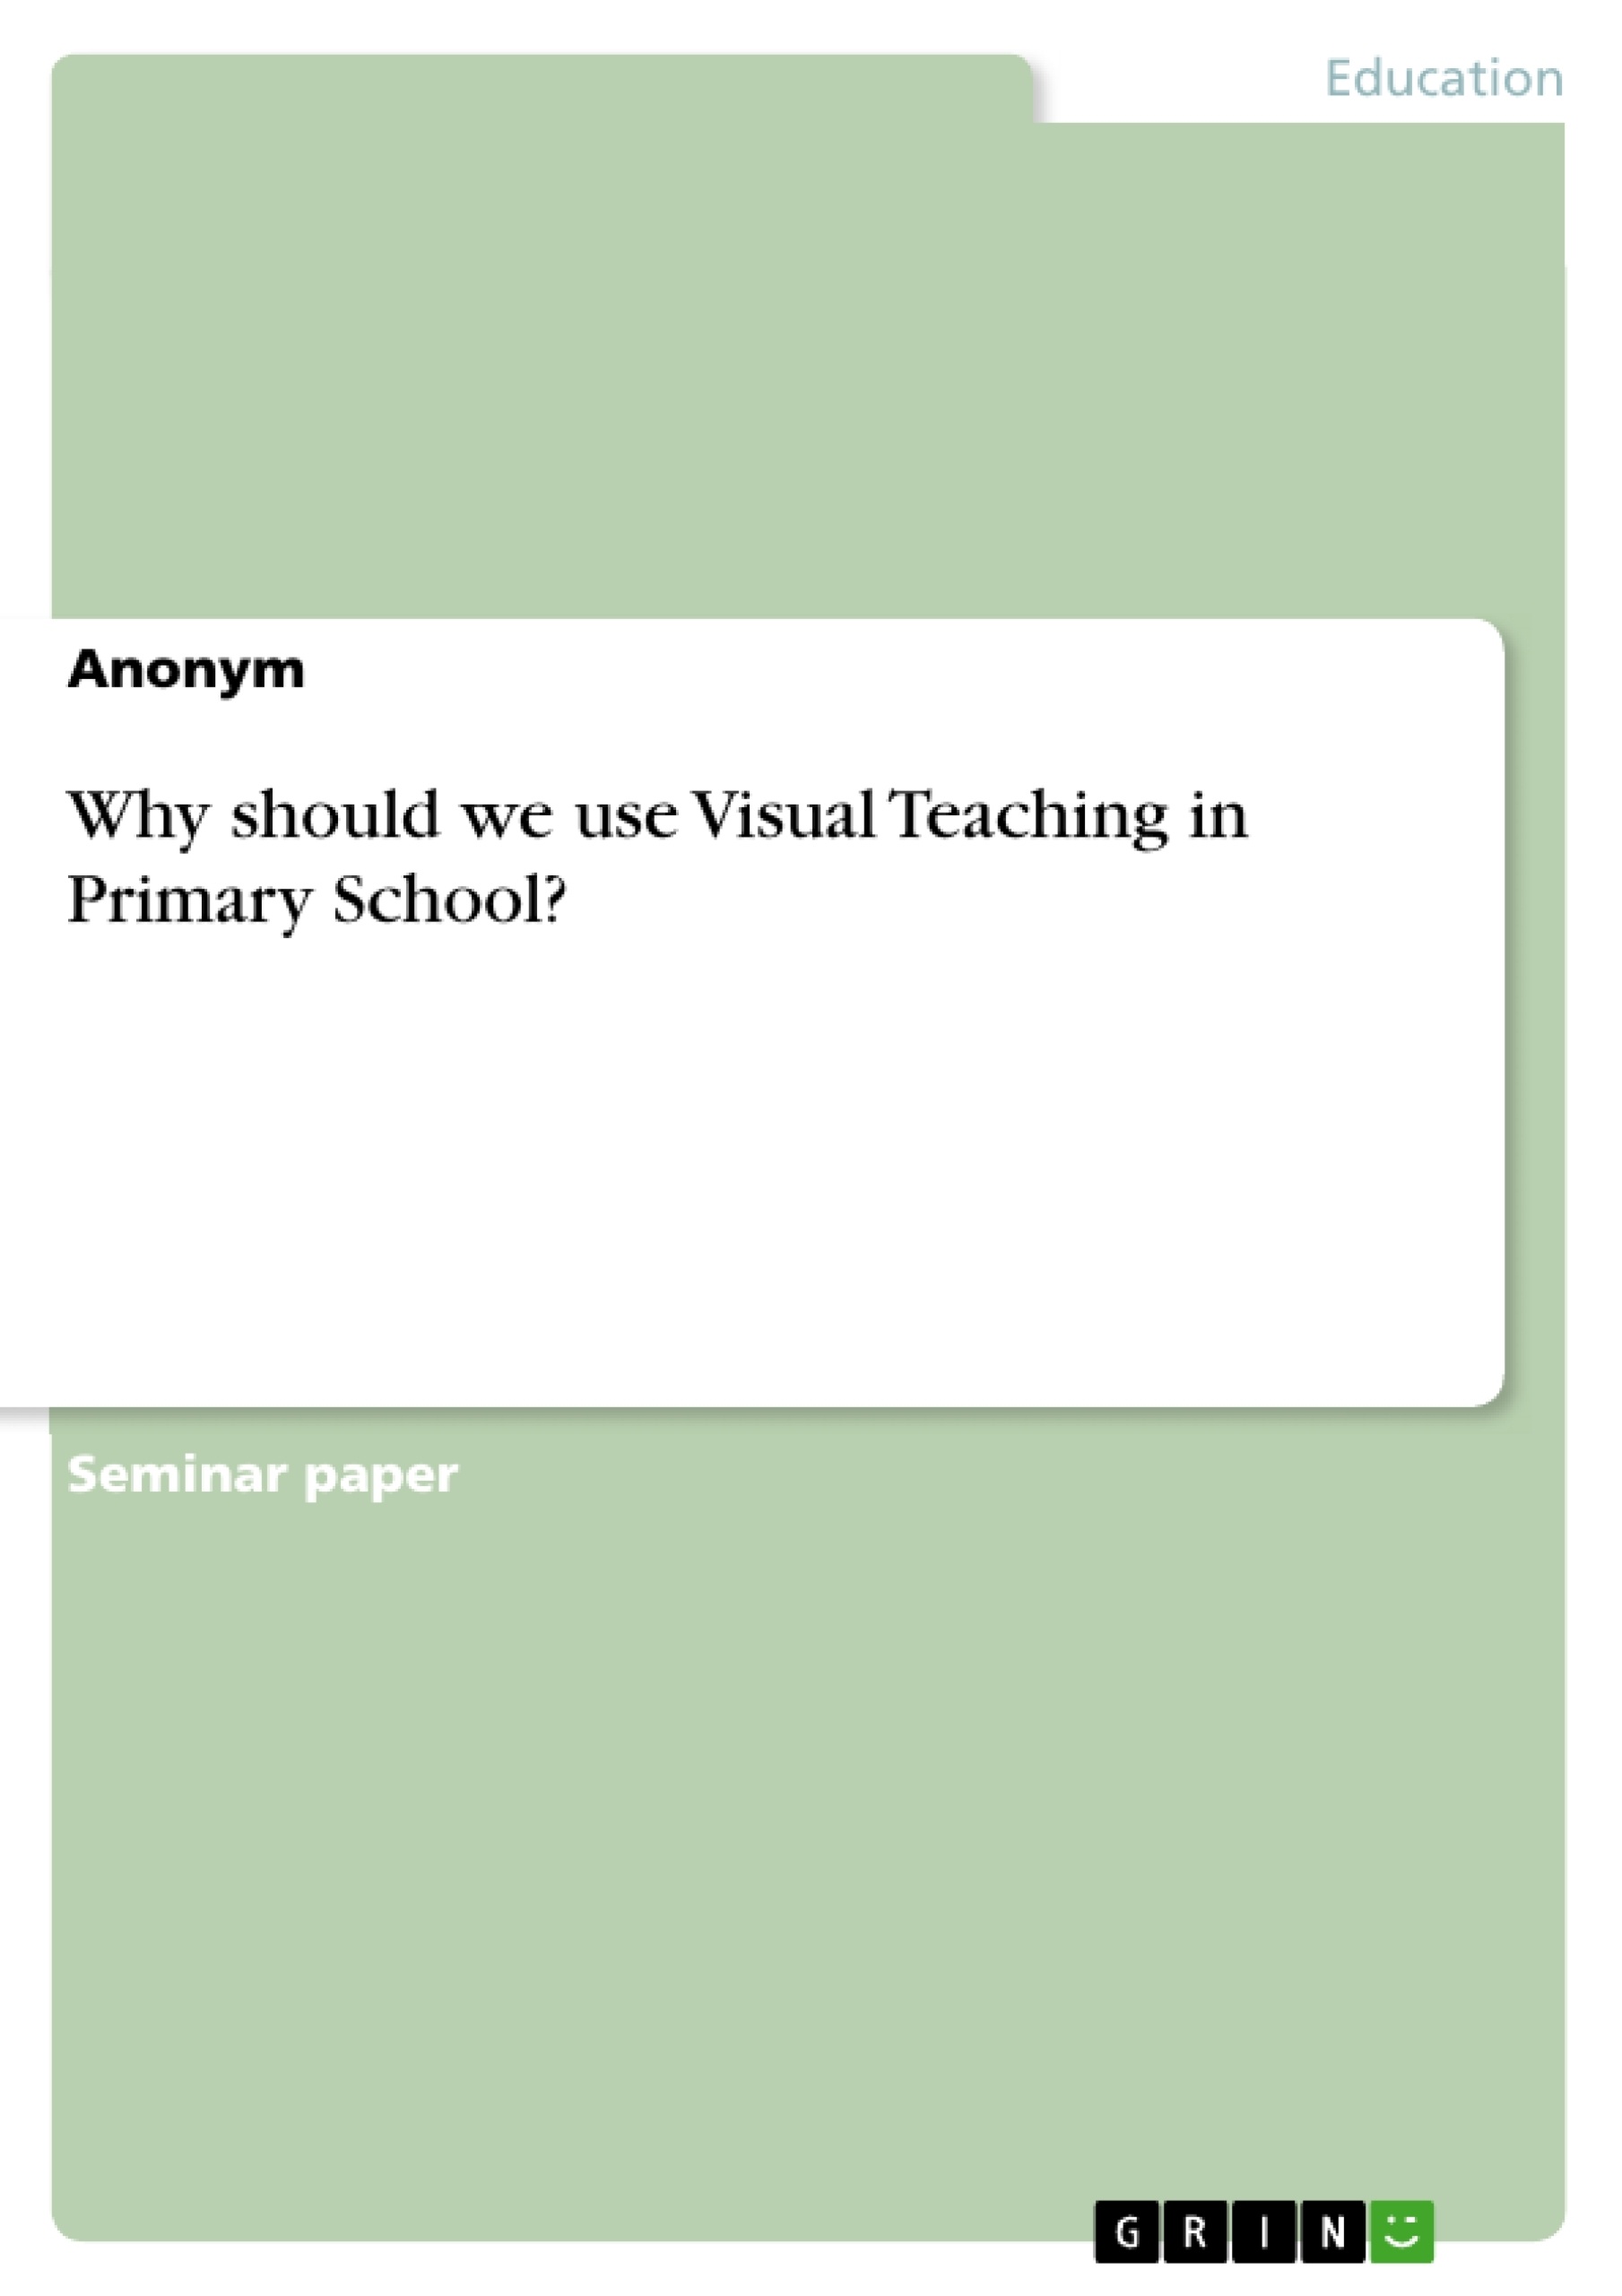 Title: Why should we use Visual Teaching in Primary School?